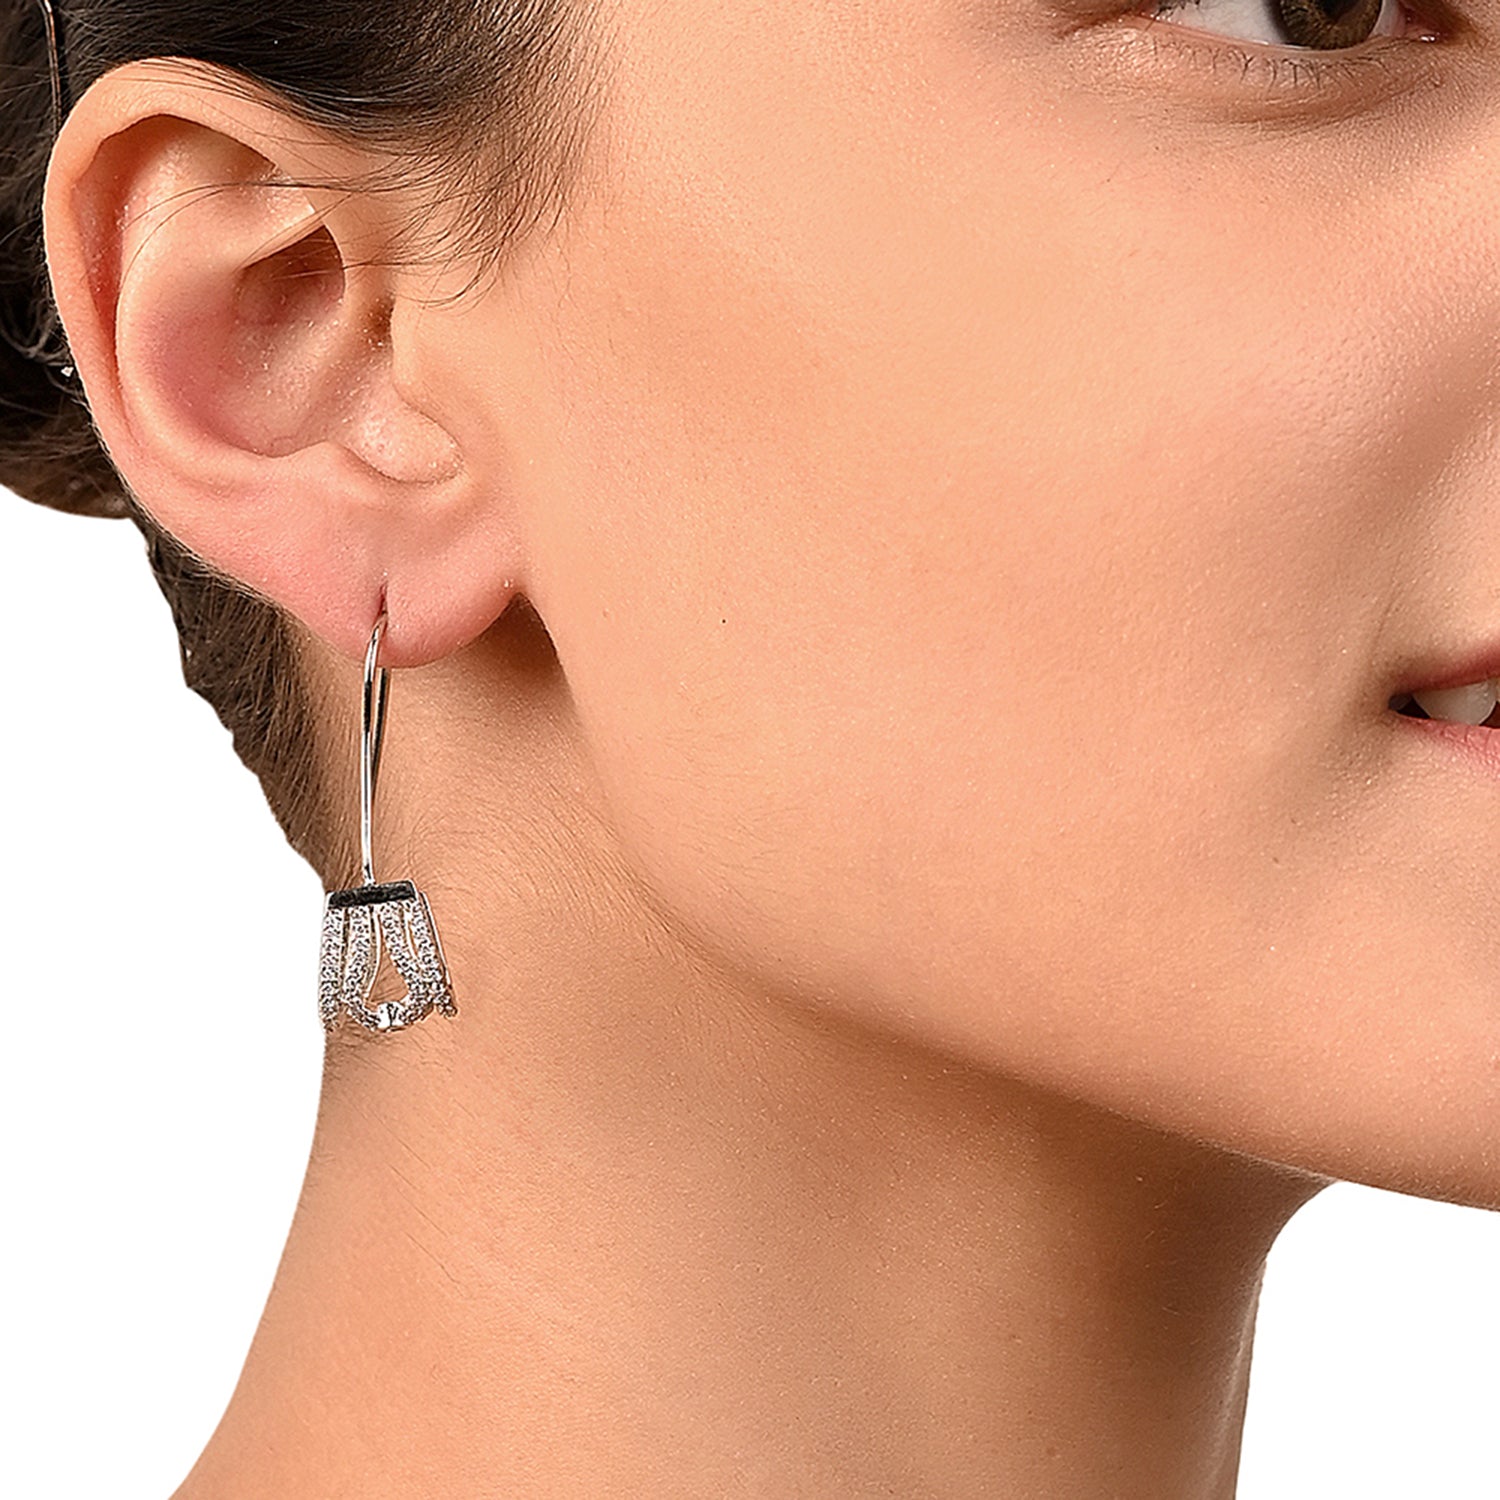 Minimalistic Silver Plated Earrings